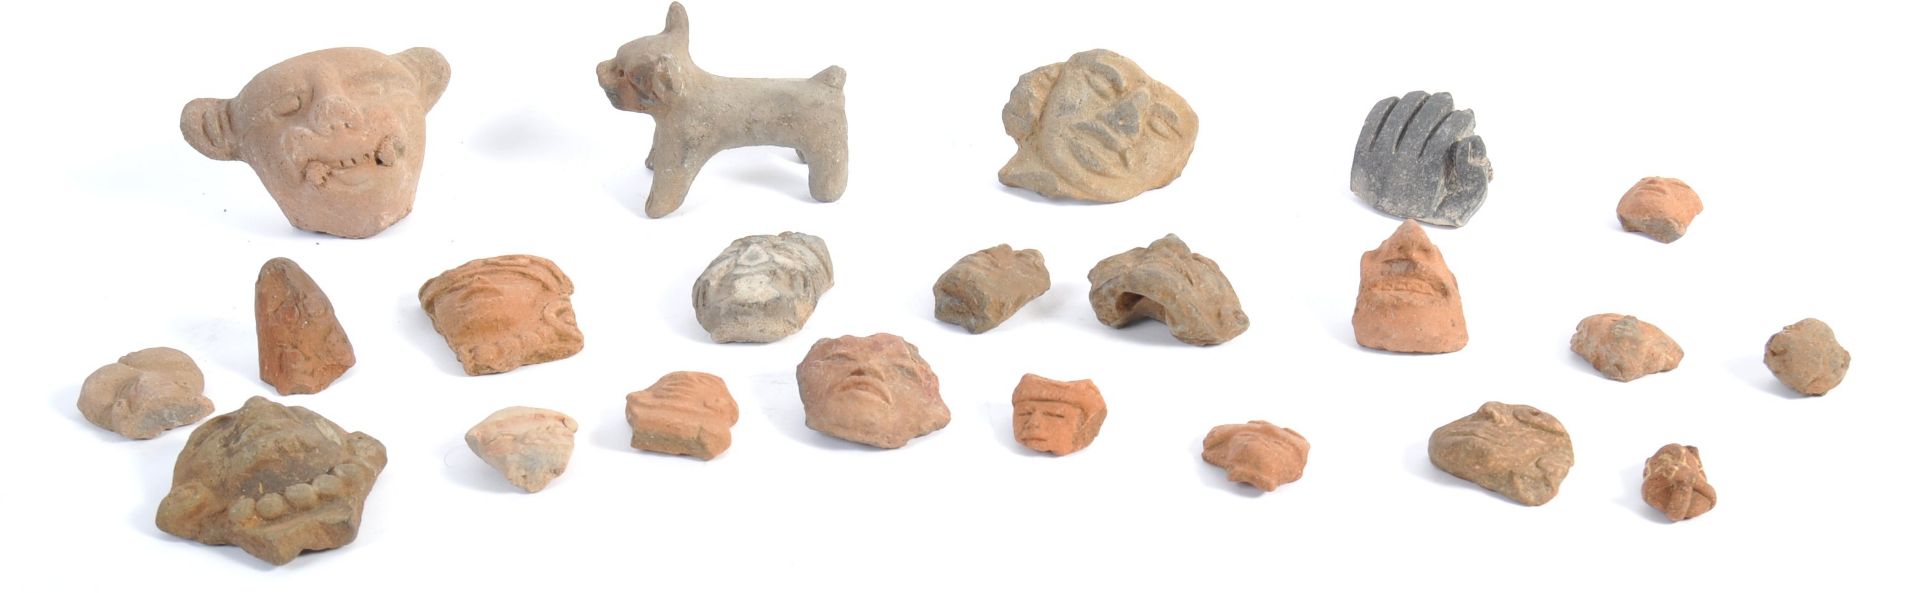 COLLECTION OF PRE-COLUMBIAN ERA MAYAN POTTERY HEADS